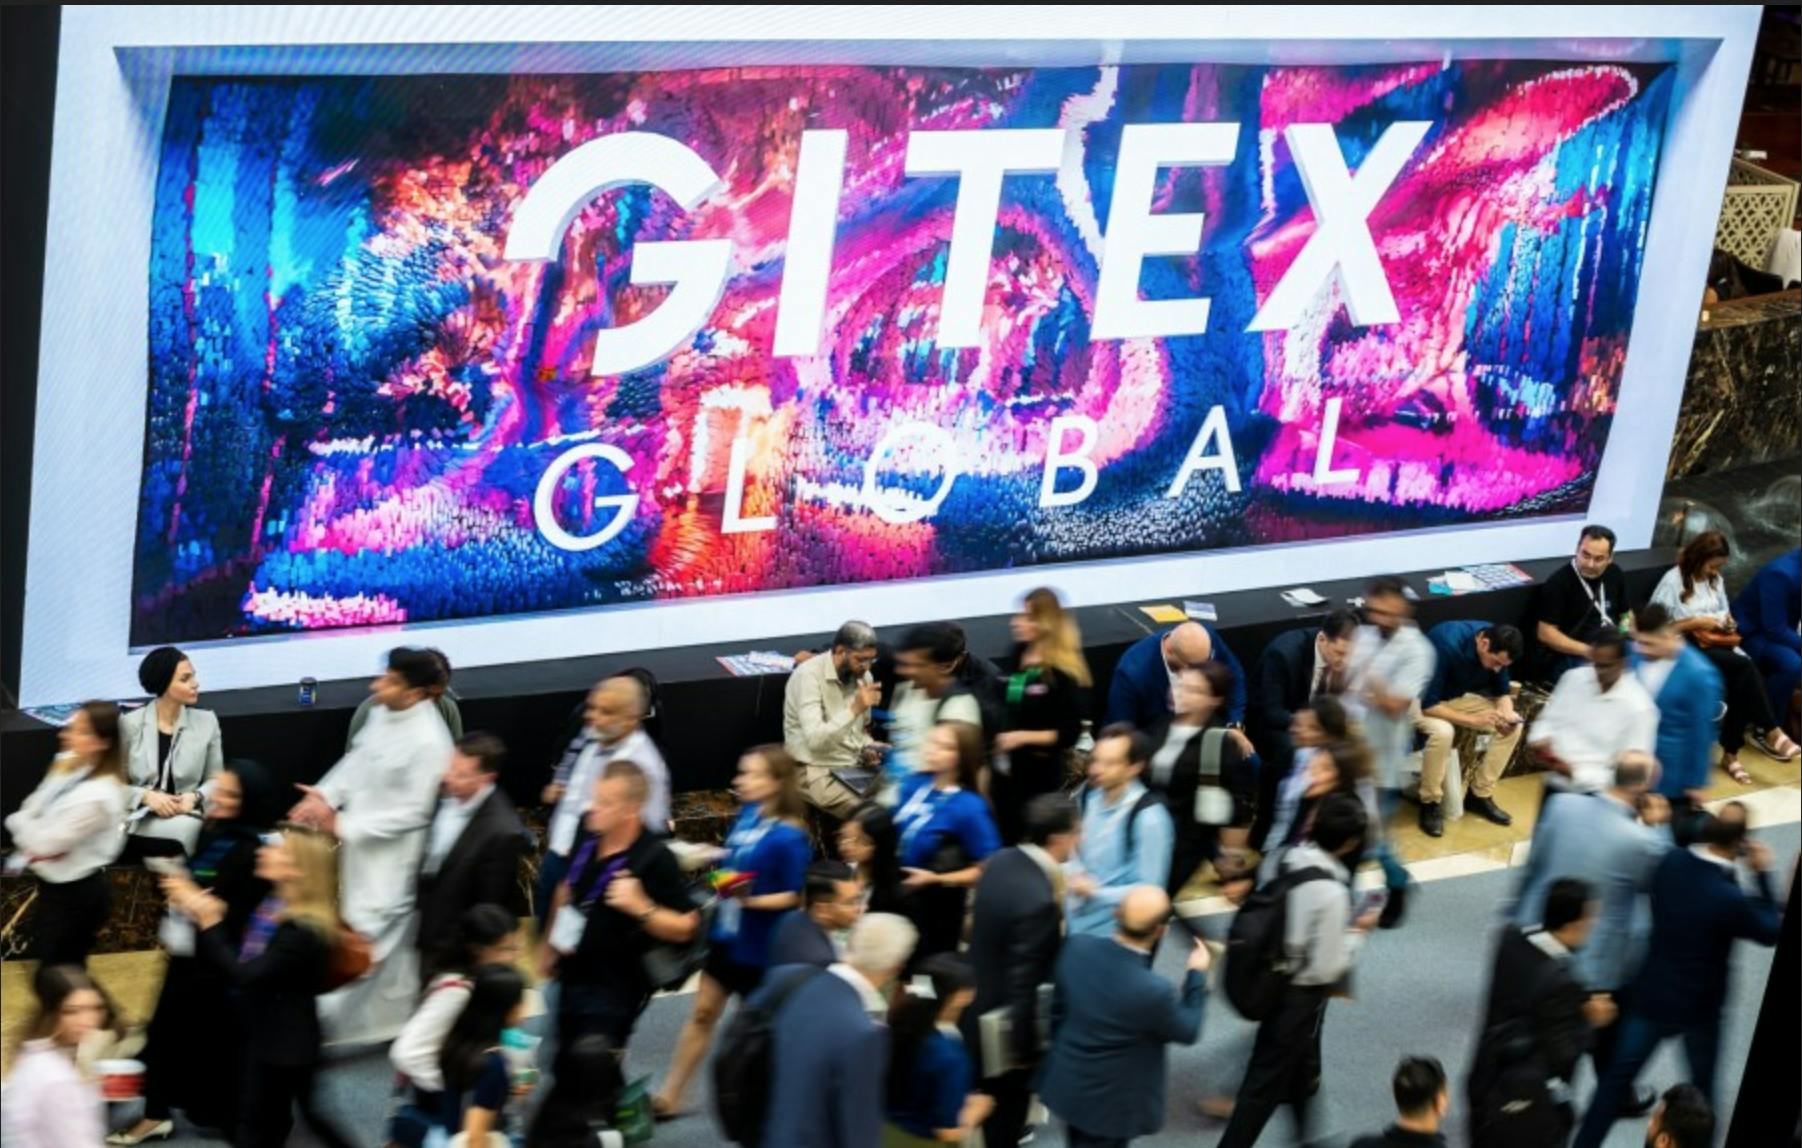 AI was more than a buzzword at this year's GITEX event